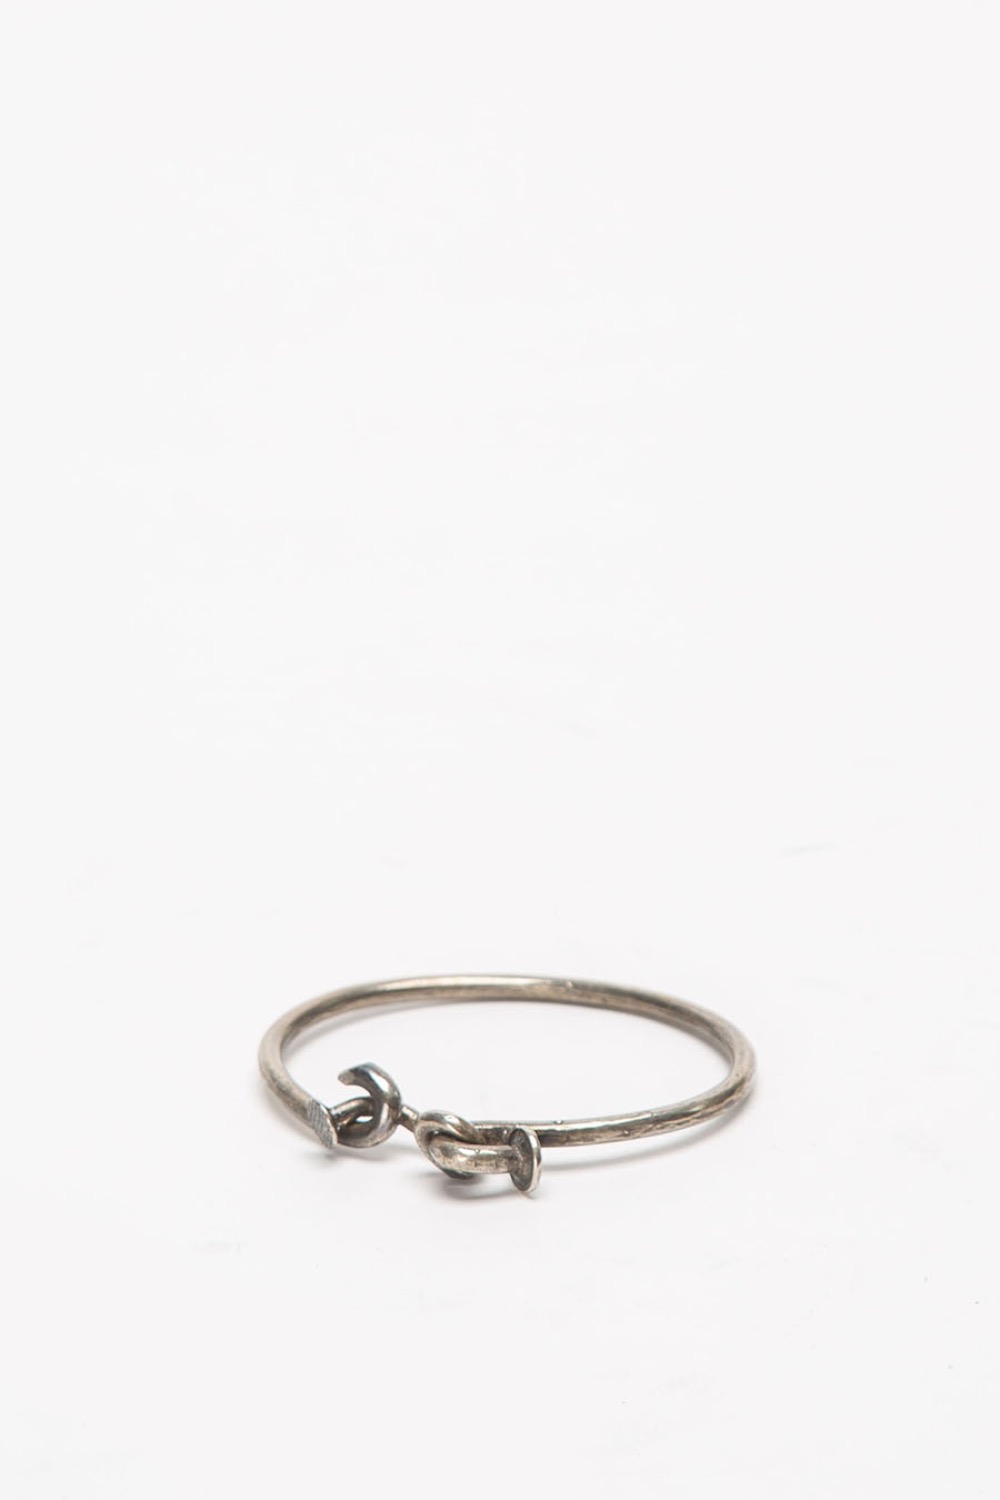 (23SS) BRUSHED SILVER 925 - CHAIN OF NAILS BRACELET